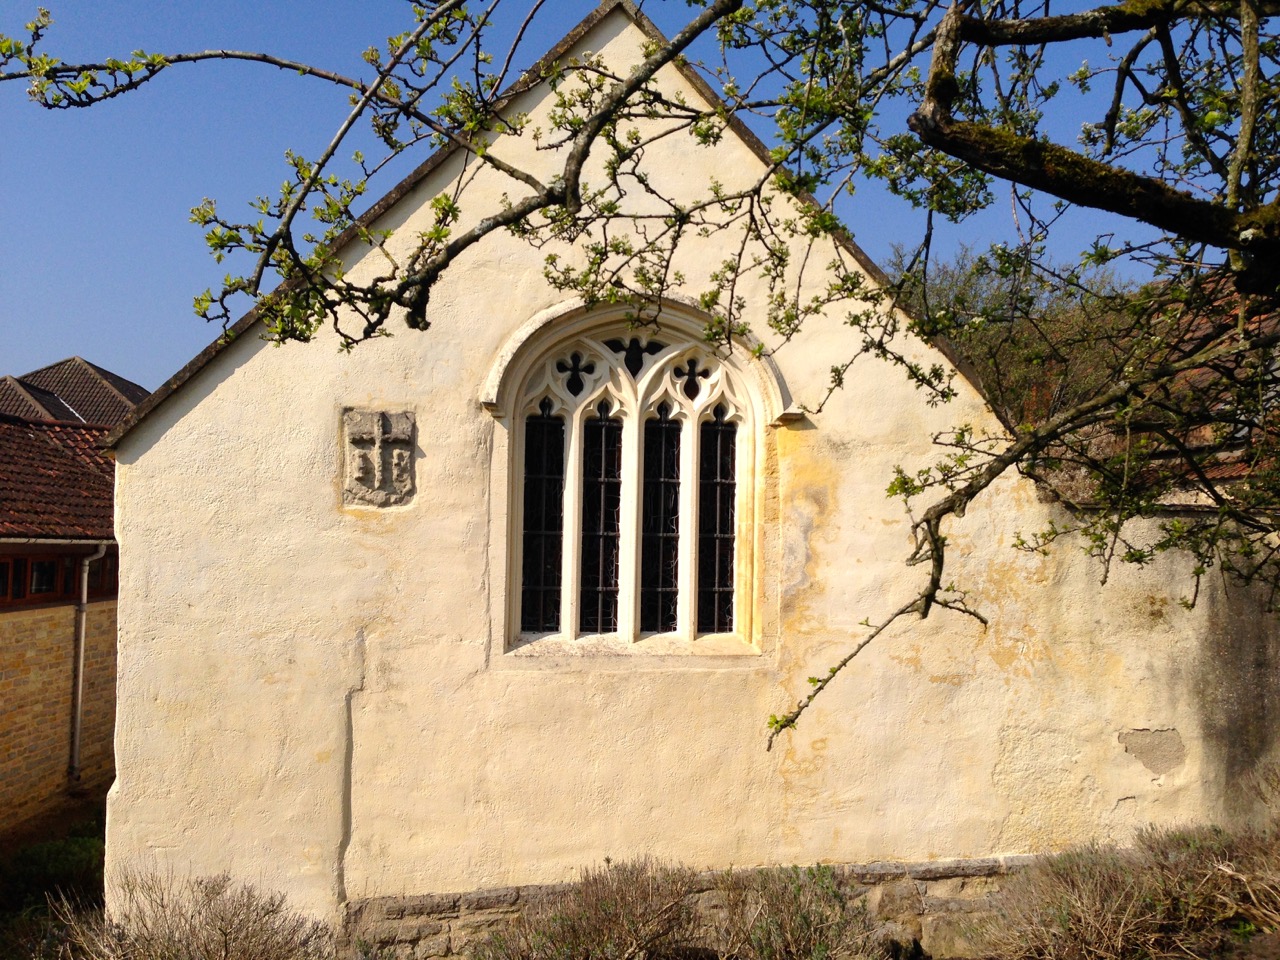 St Patrick's Chapel - one of the earliest buildings at Glastonbury